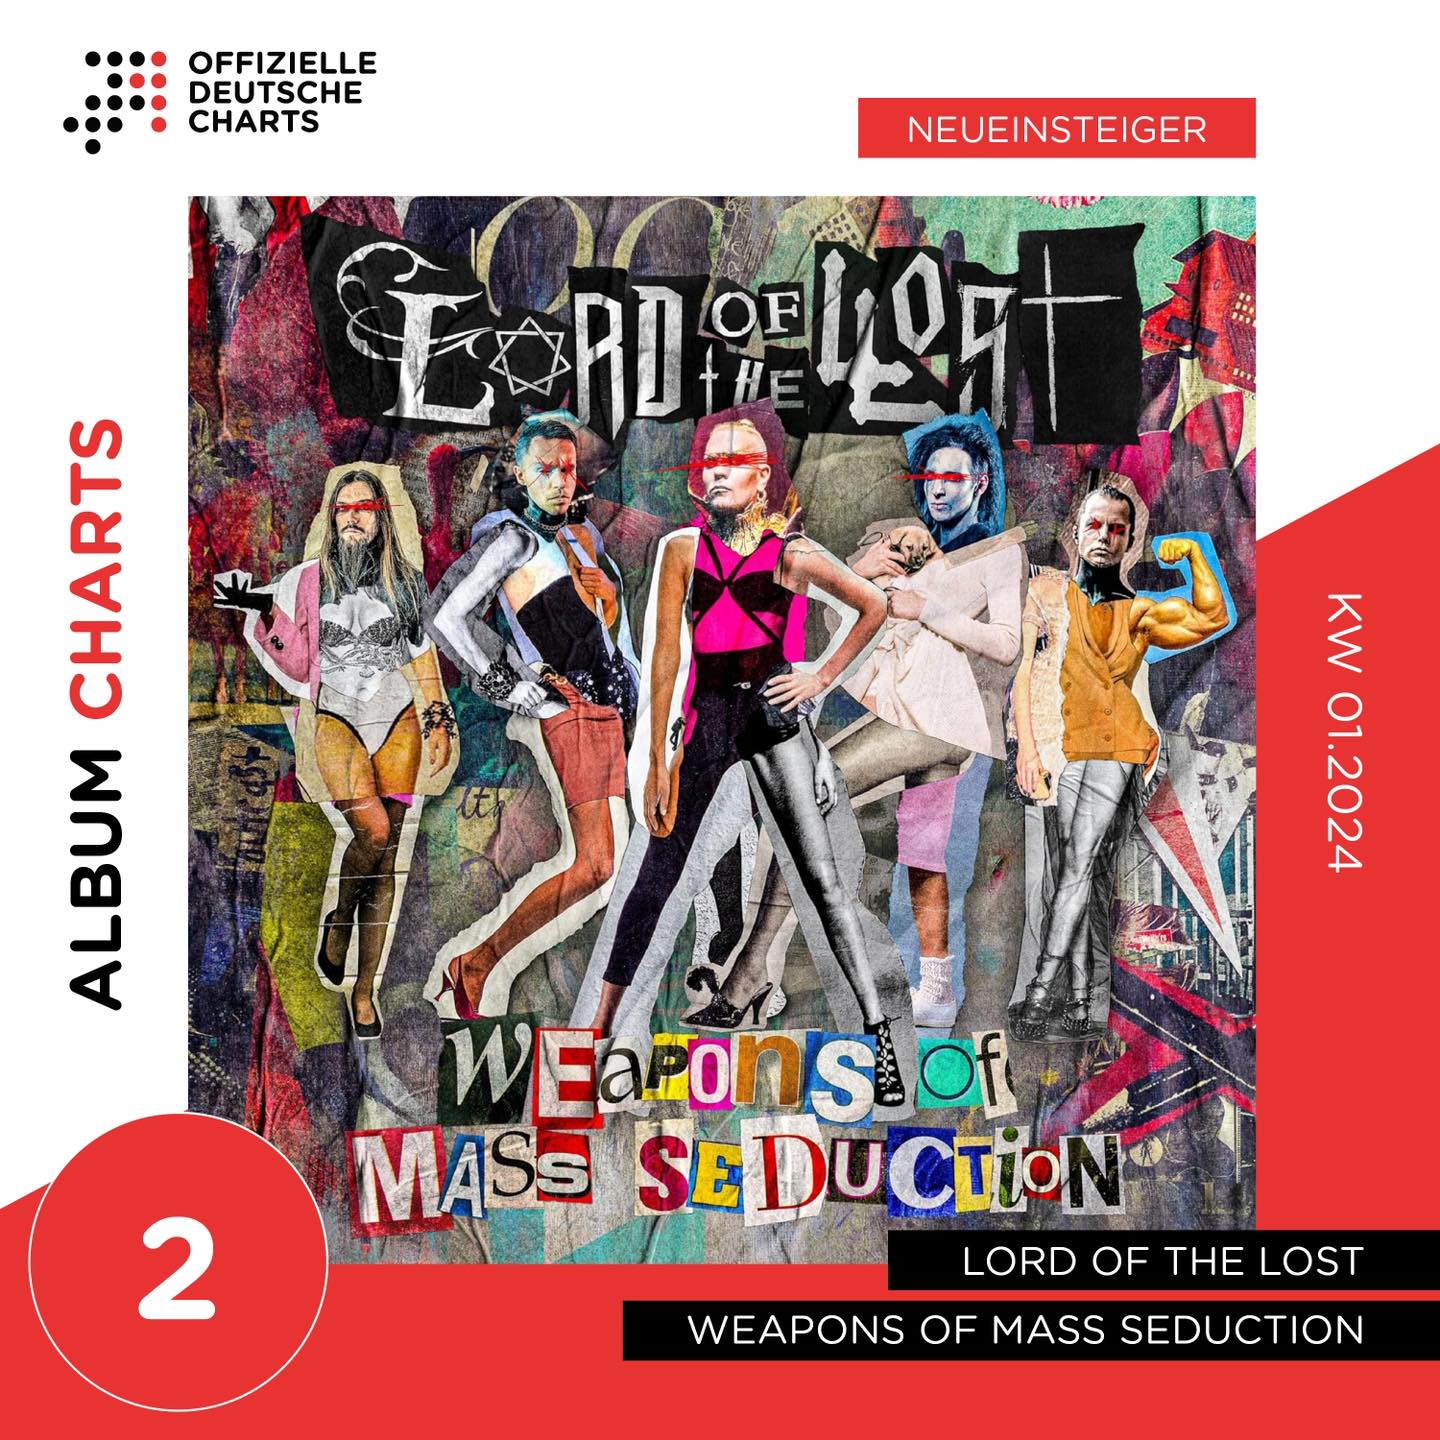 NEWS: Weapons Of Mass Seduction by Lord of the Lost Hits #2 on the Official German Album Charts